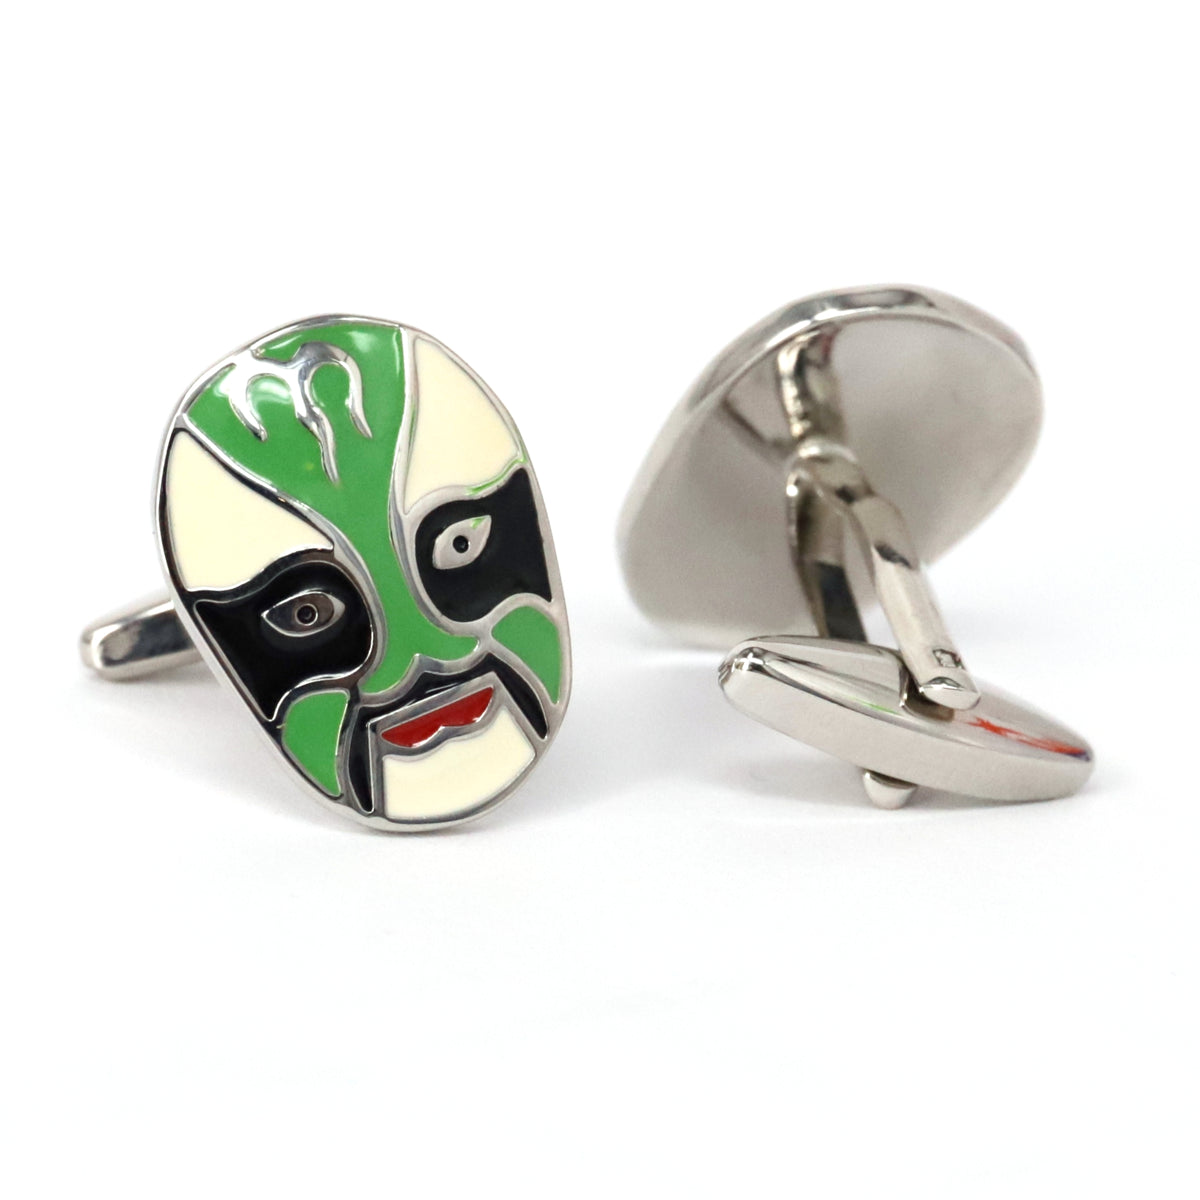 Jing Mask or Chinese Opera mask  green white Cufflinks (Online Exclusive)